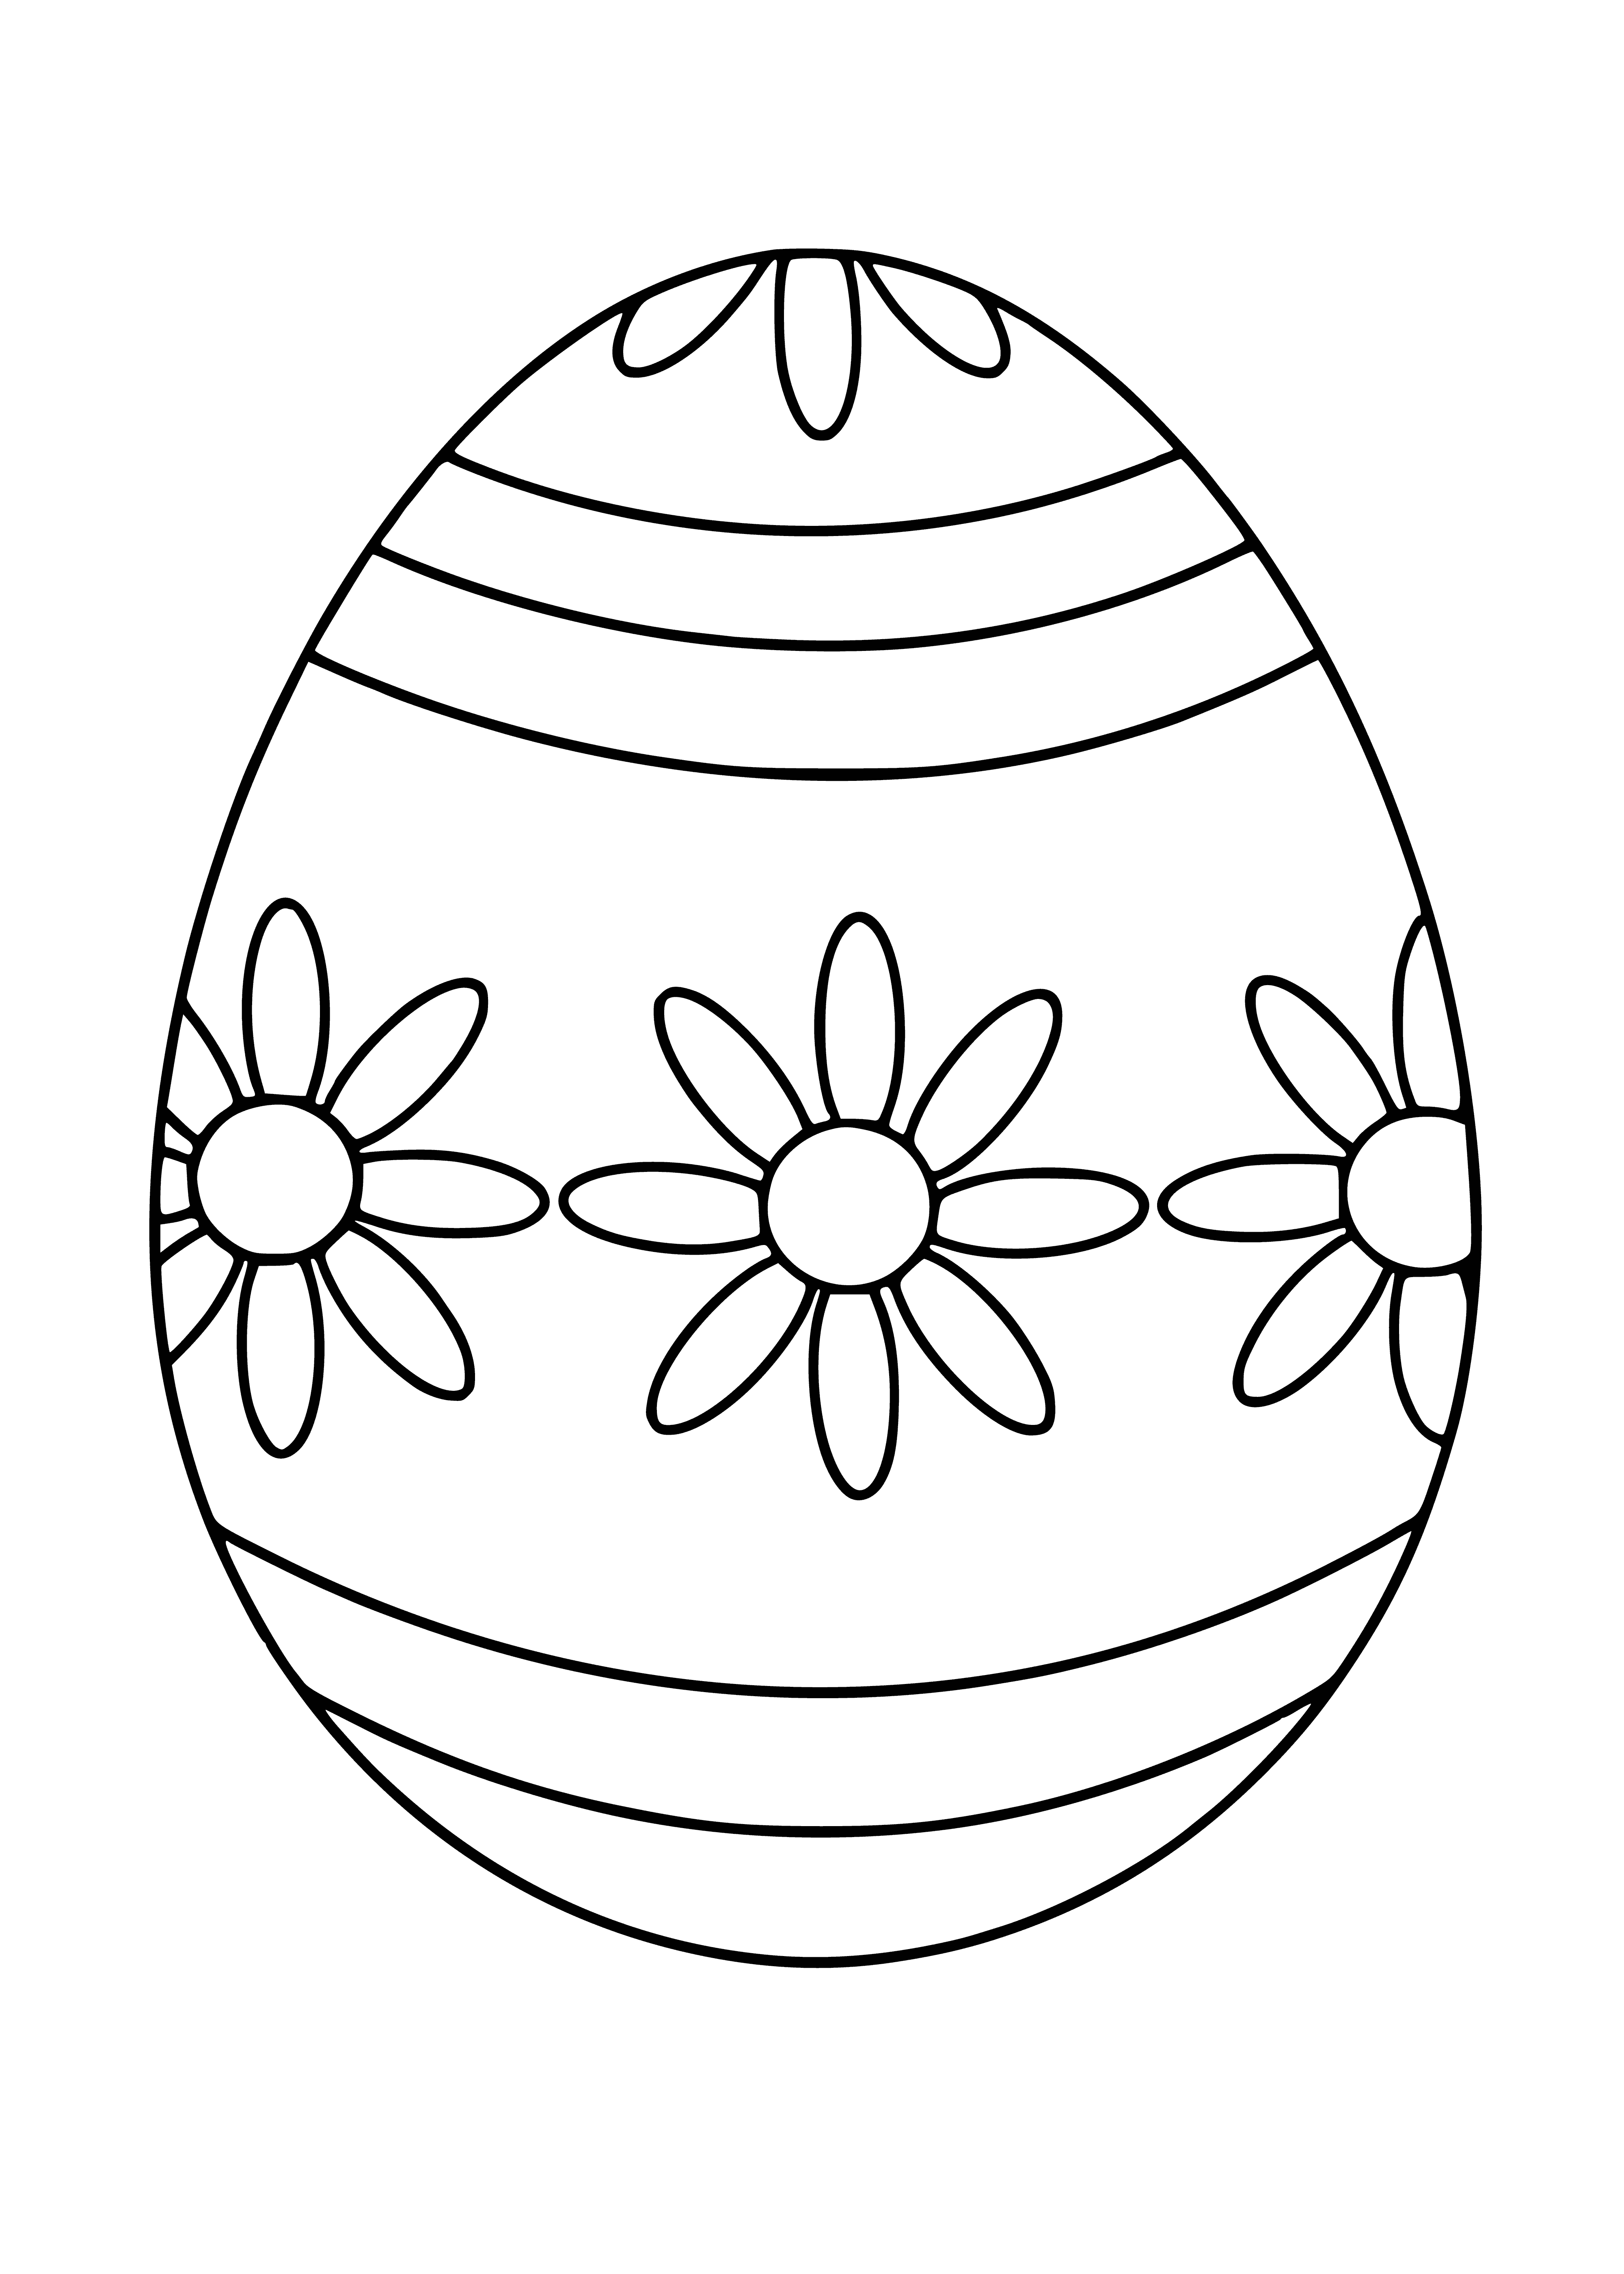 coloring page: Three Easter eggs - blue, yellow, and pink - each decorated differently, with a small brown egg inside. #EasterCrafts